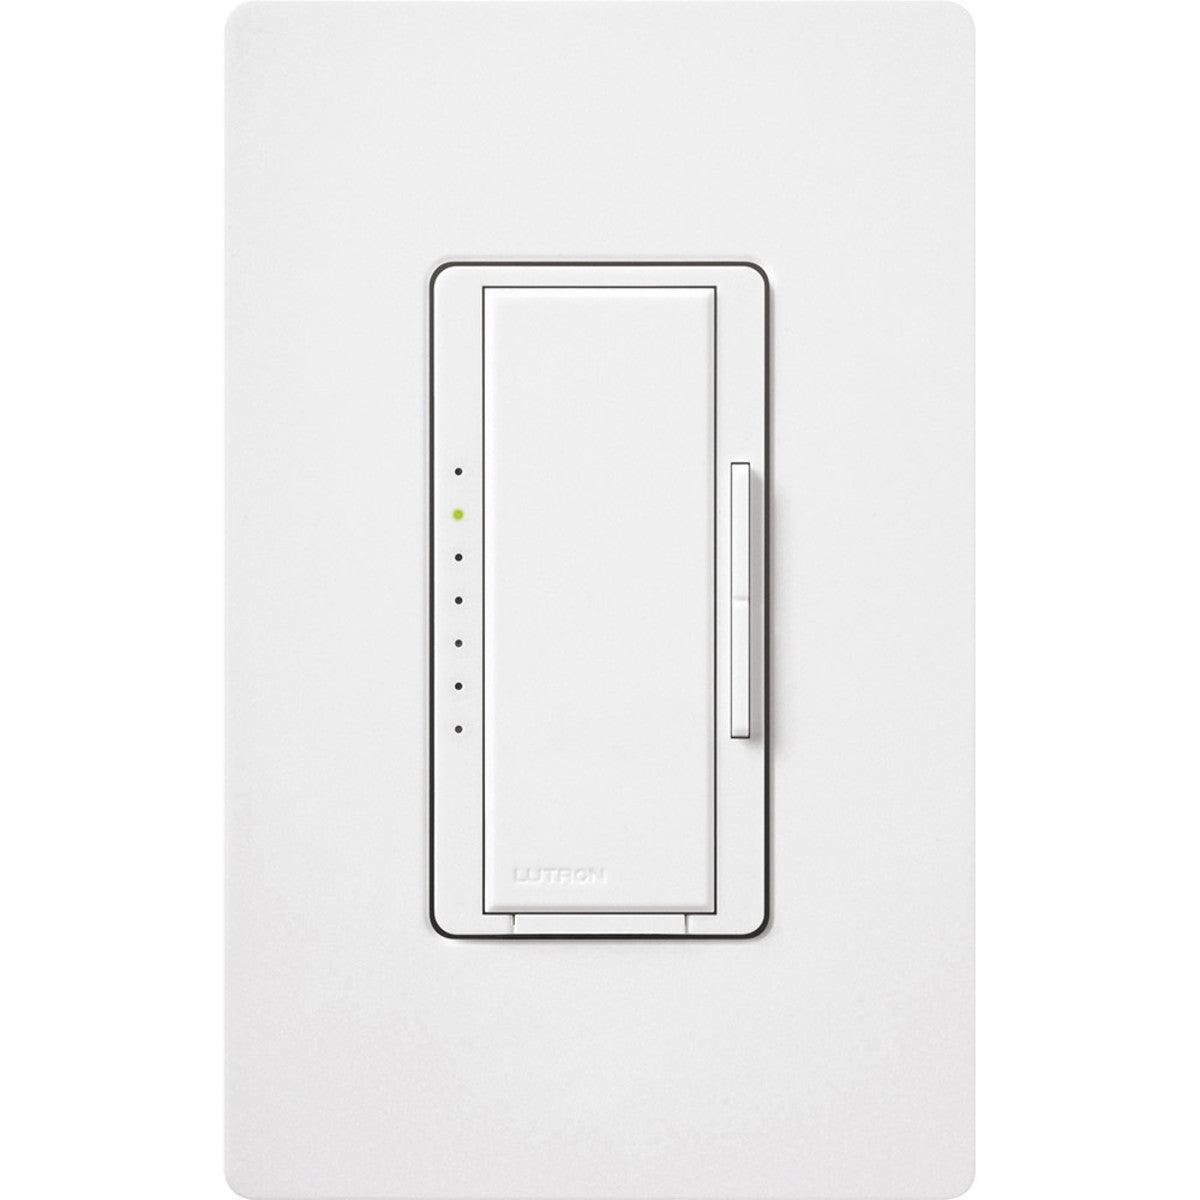 Lutron Maestro Dimmer Switches and Light Switches - Bees Lighting